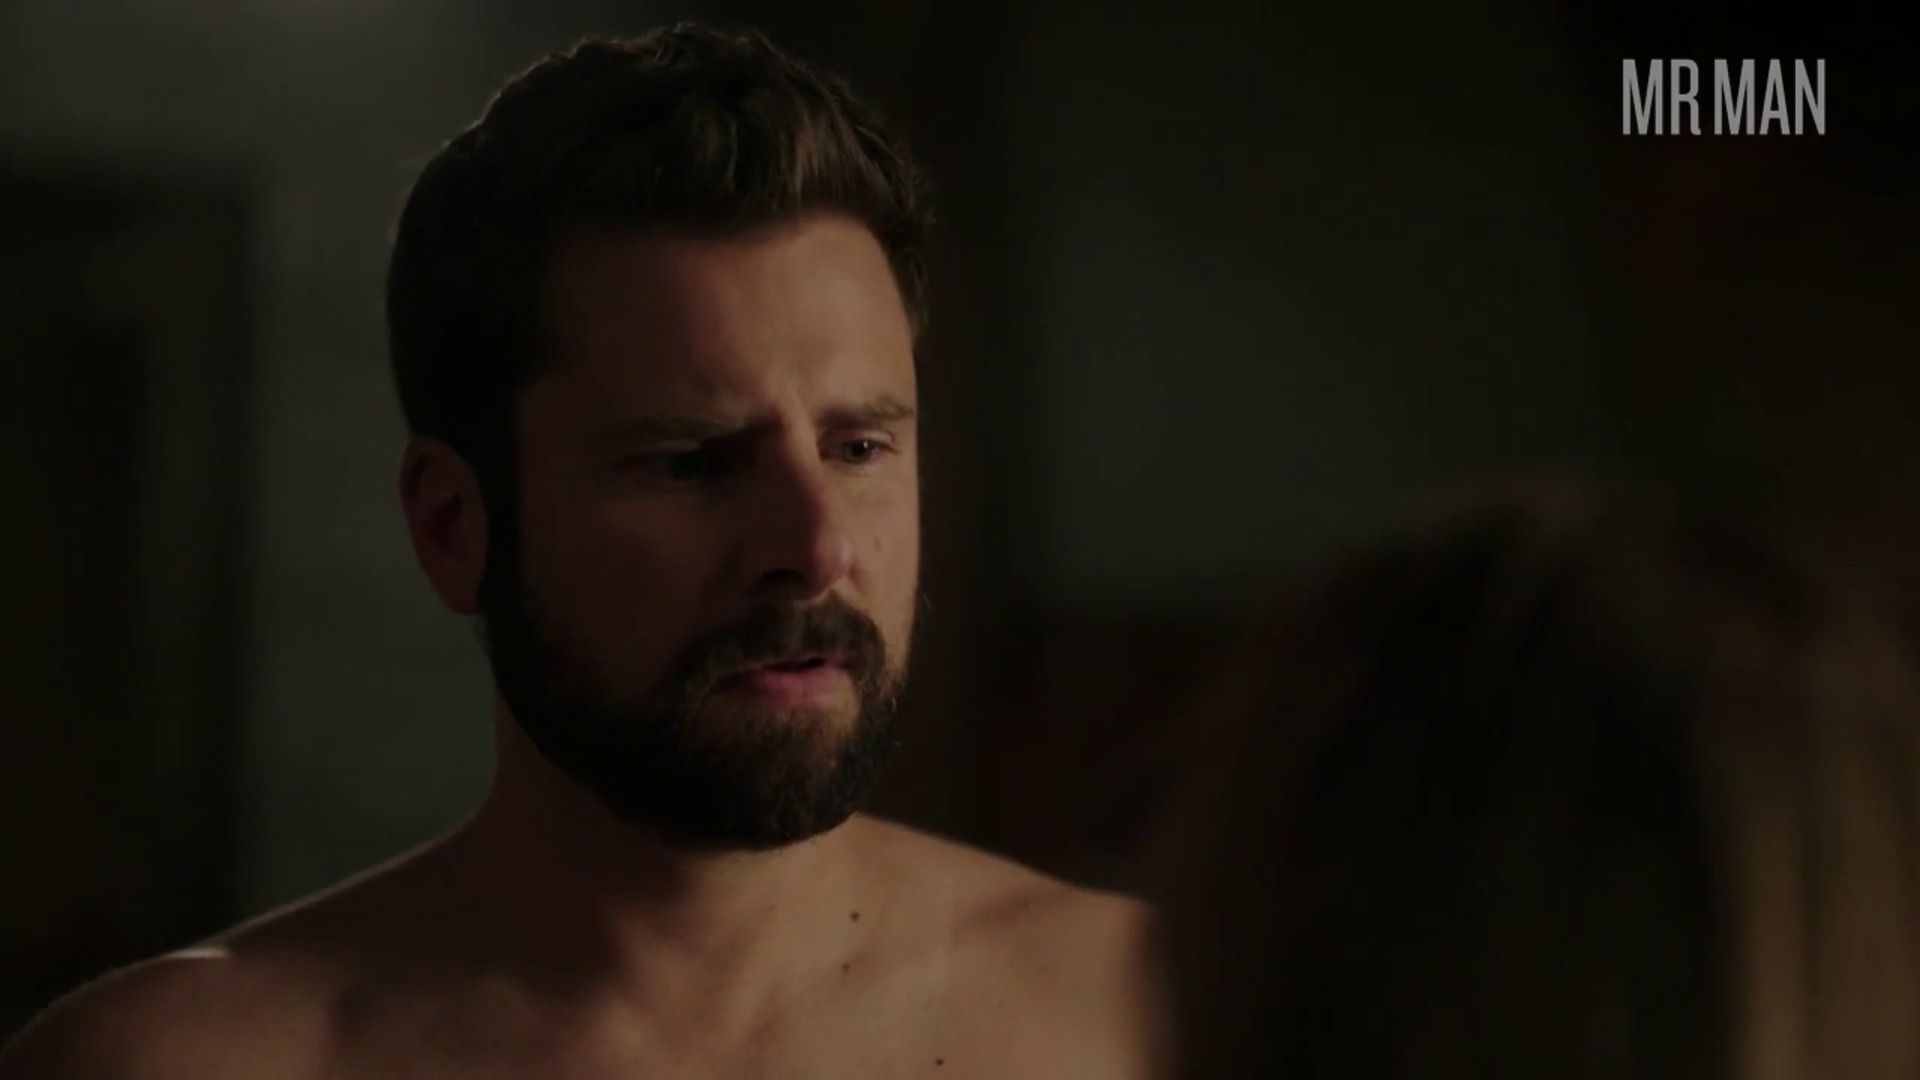 James Roday Having Sex - James Roday Nude? Find out at Mr. Man